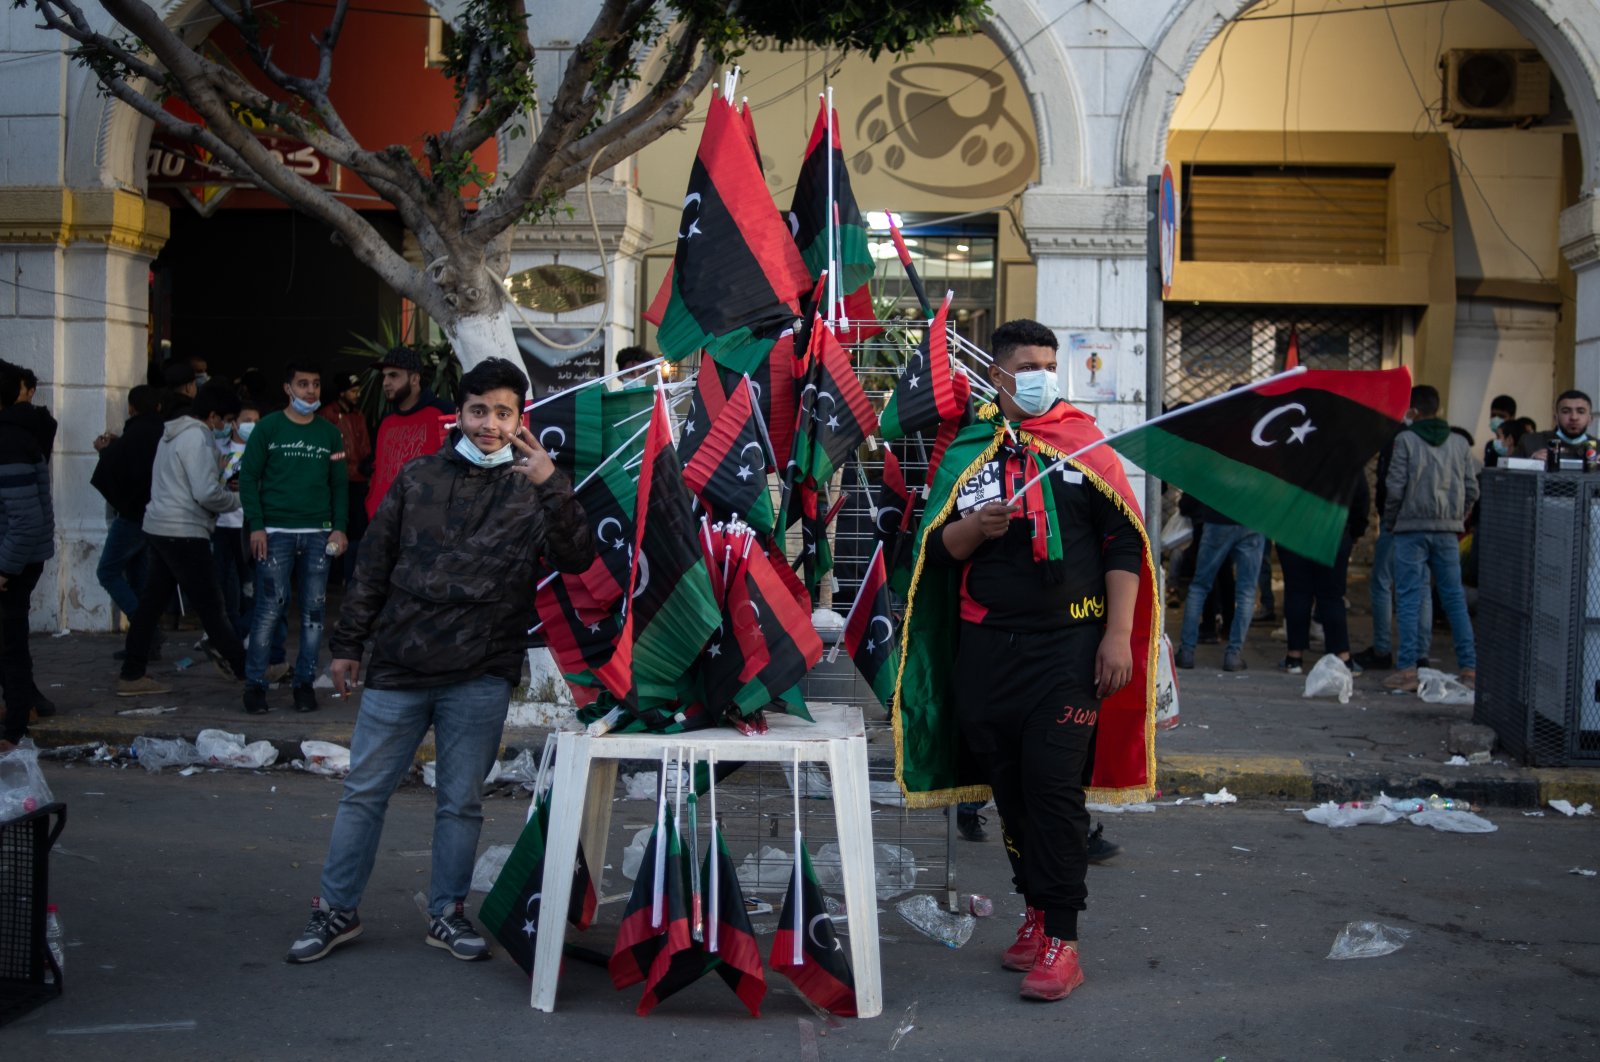 Men sell flags during a gathering to commemorate the tenth anniversary of the Arab Spring in Martyrs Square, Tripoli, Libya, Feb. 17, 2021. (Photo by Getty Images)